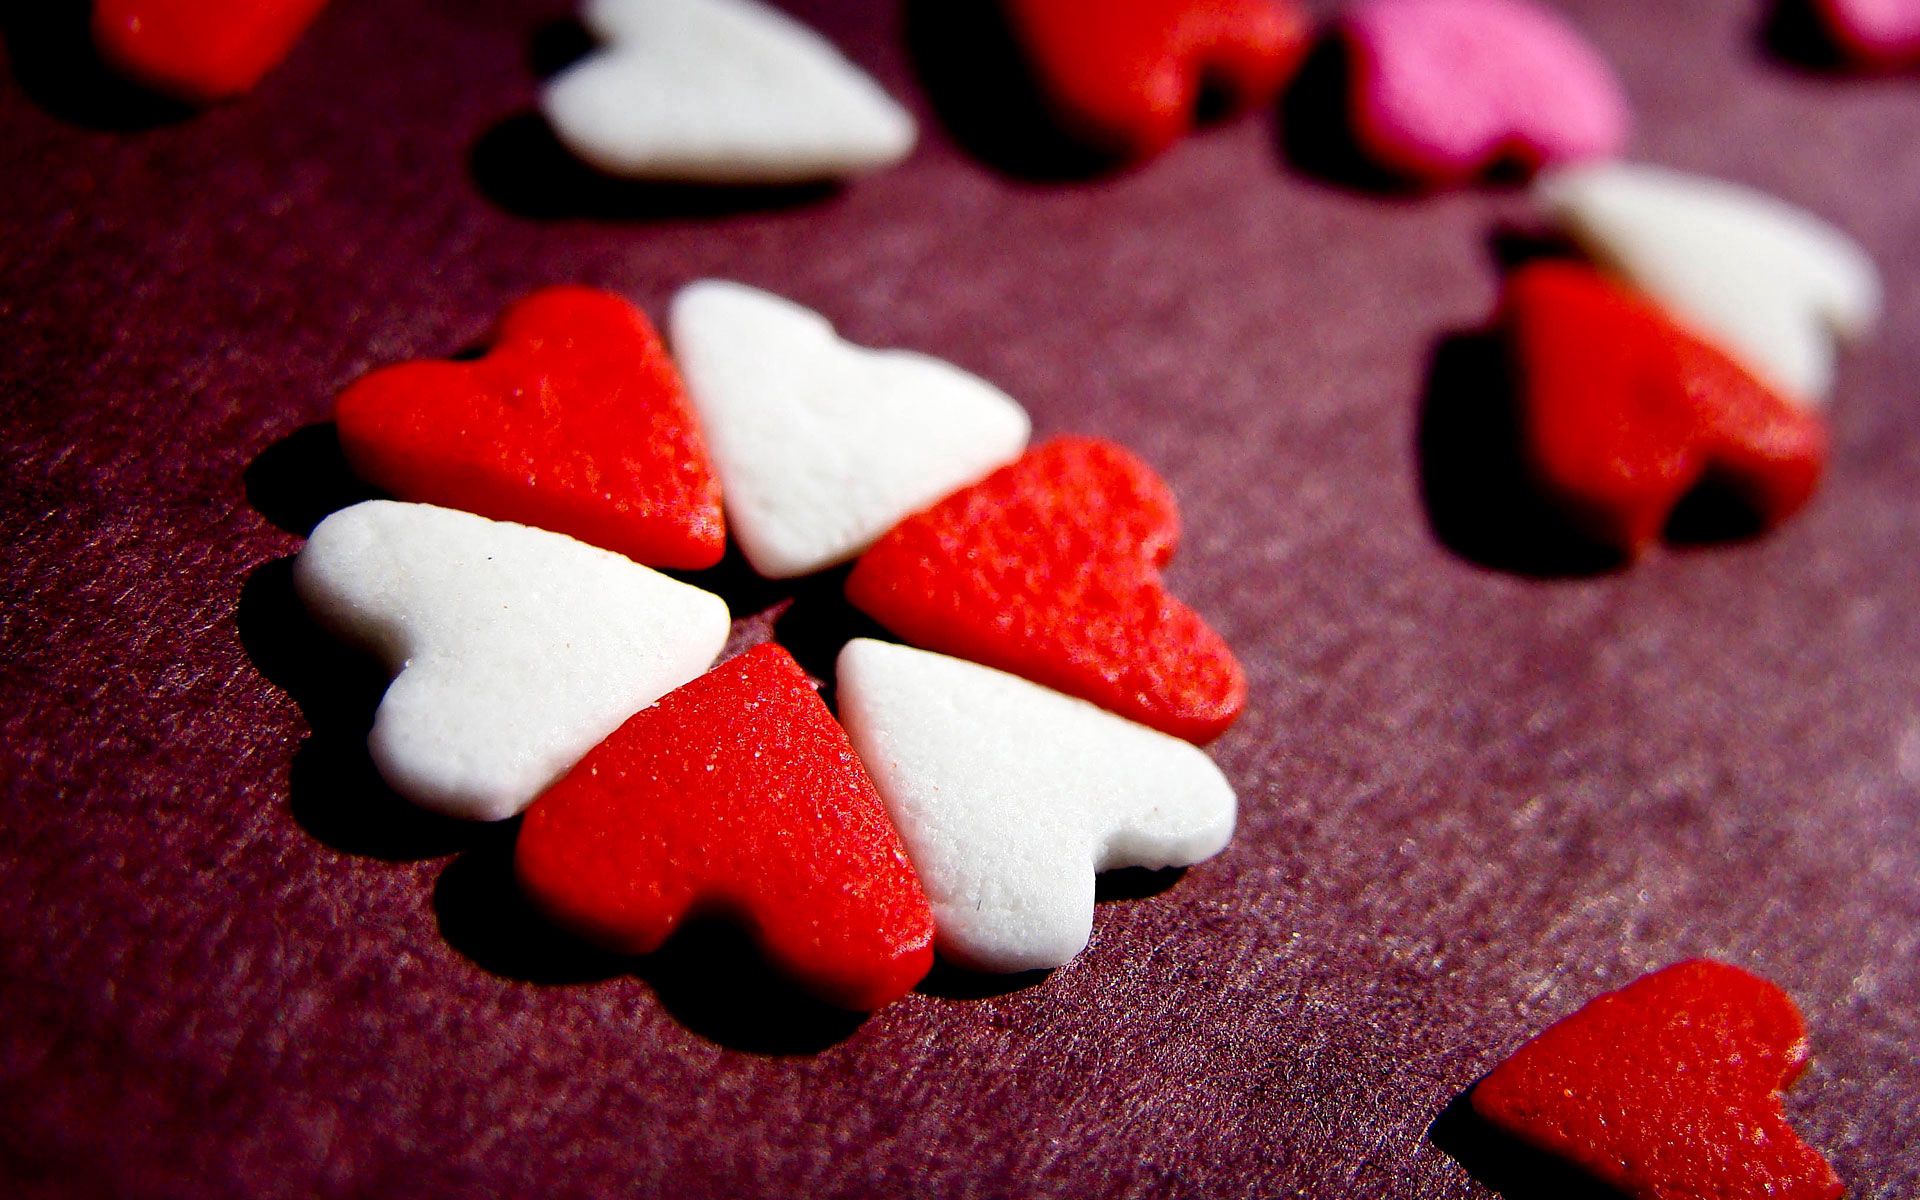 candies, macro, surface, form, table, heart